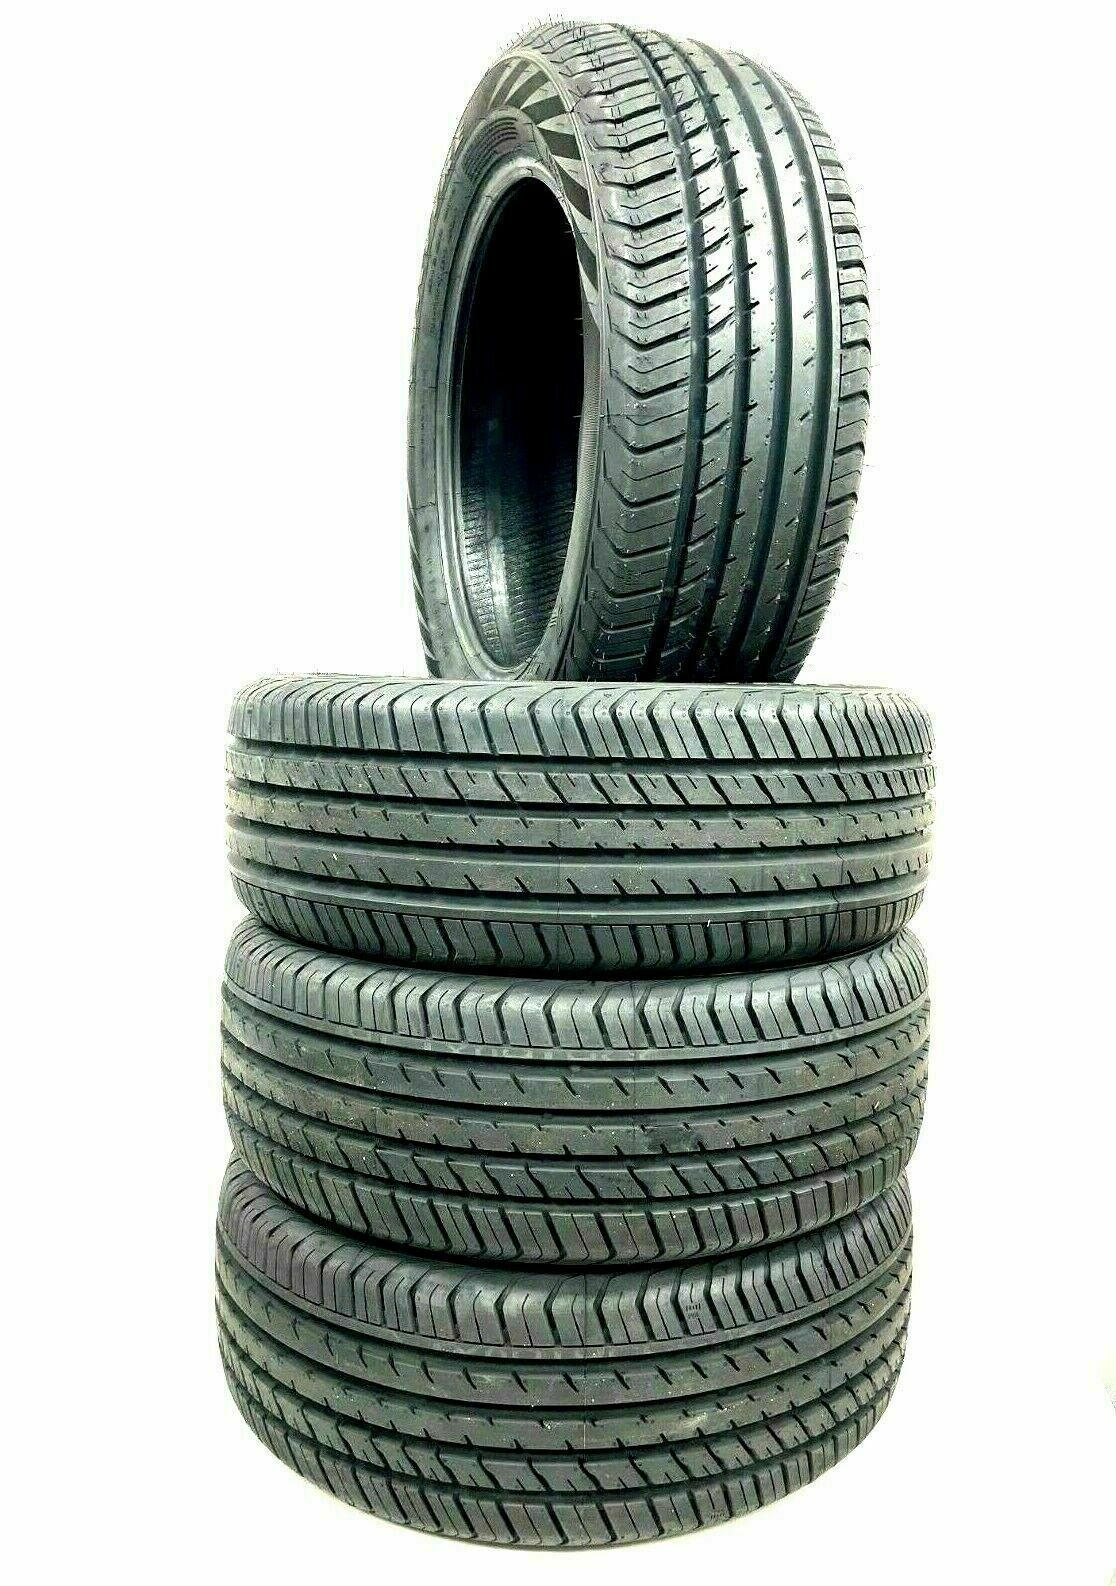 Four 215 60 16 UX Royale All Seaon - 215/60r16 Tires 2156016 215 60 16